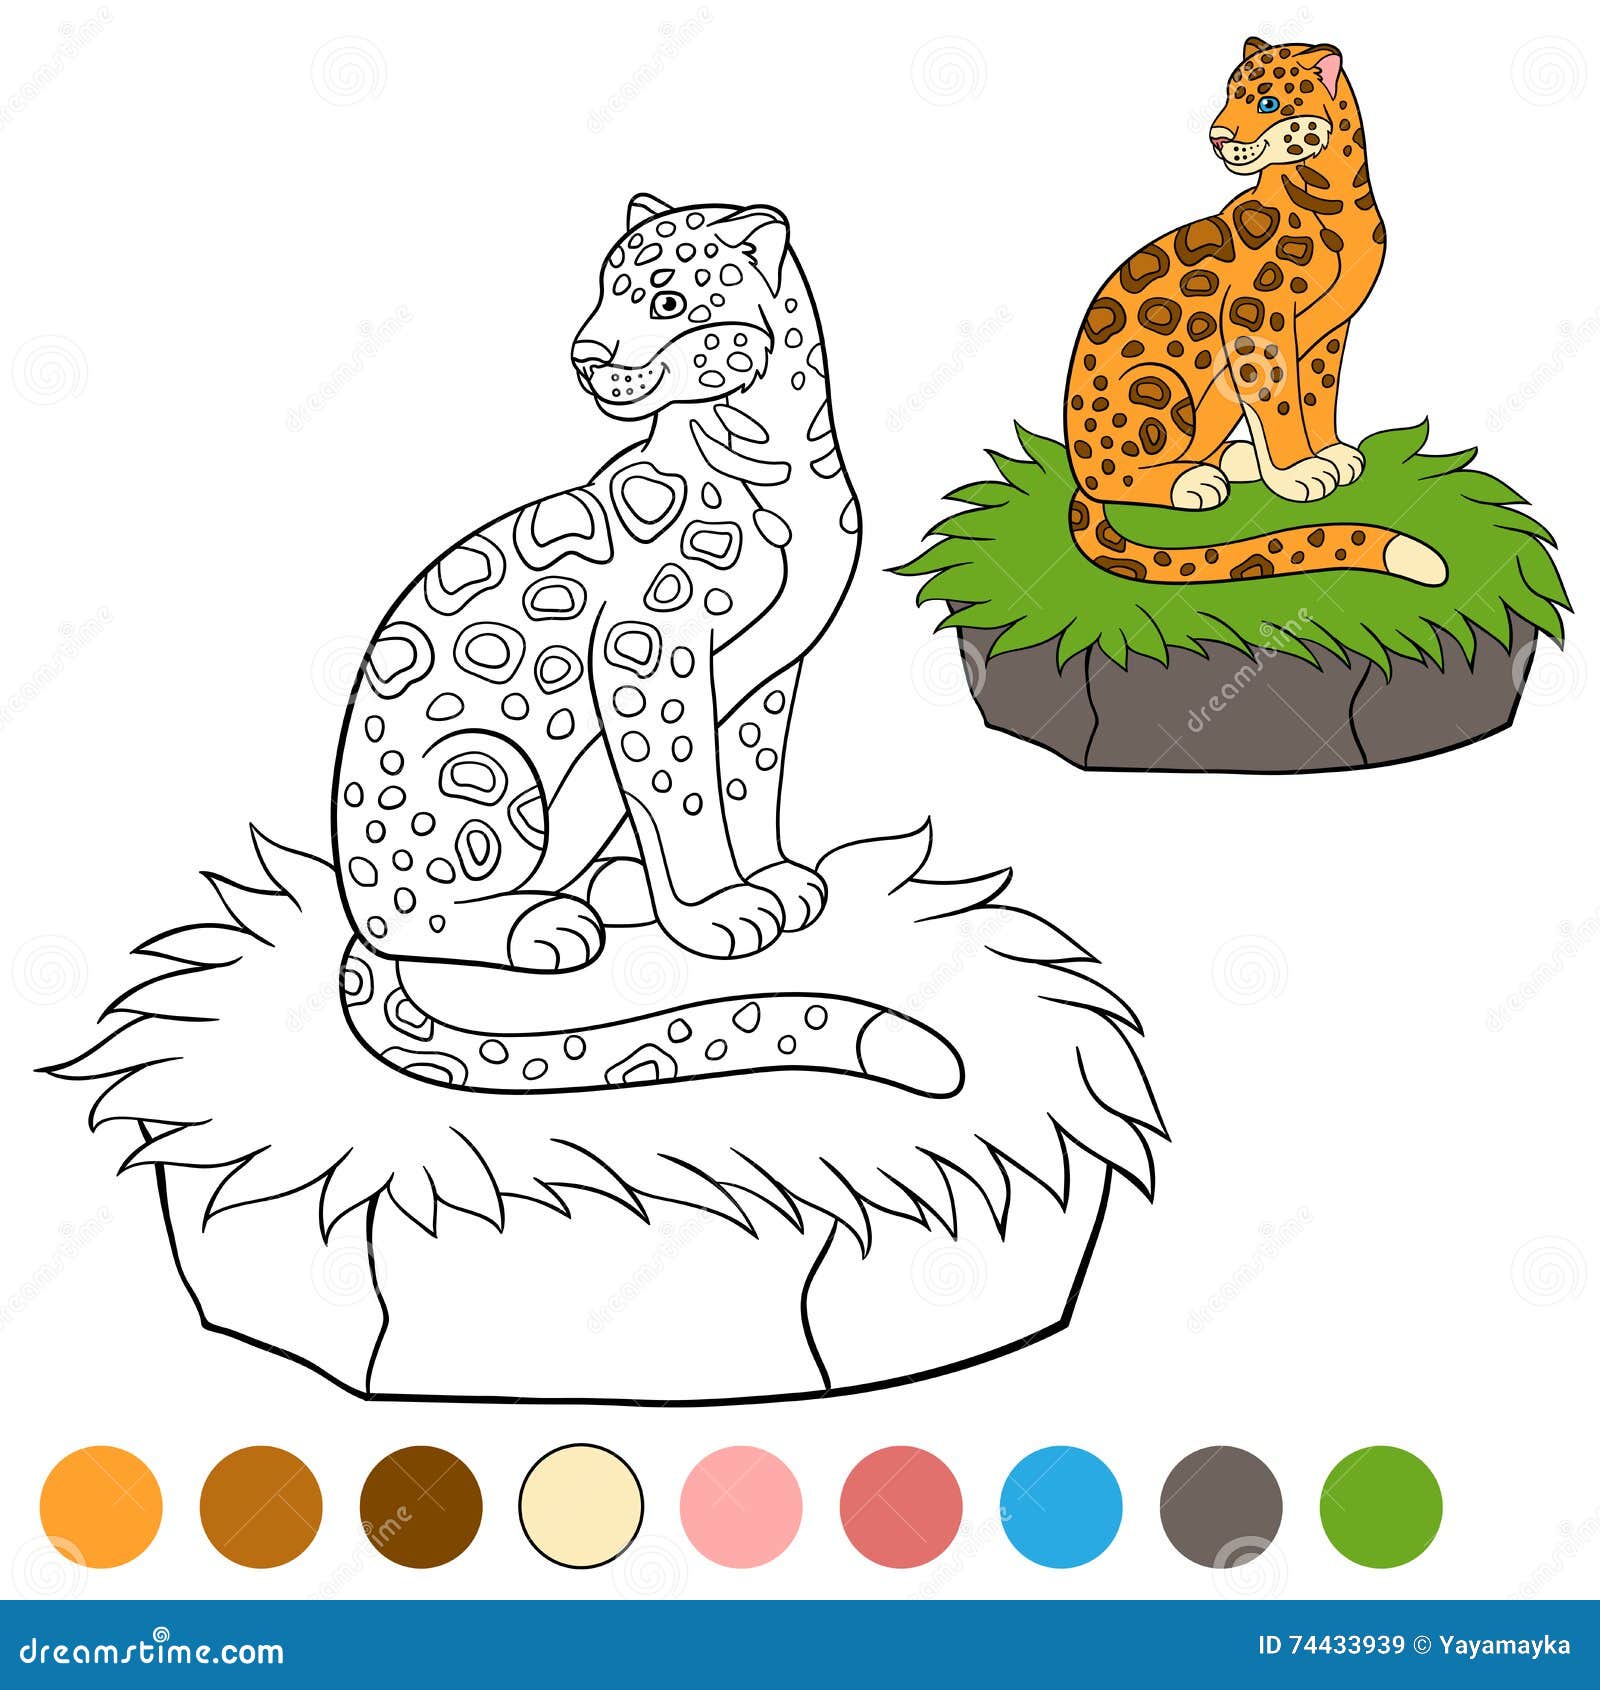 Coloring Page with Colors. Cute Jaguar Sits on the Grass. Stock Vector ...